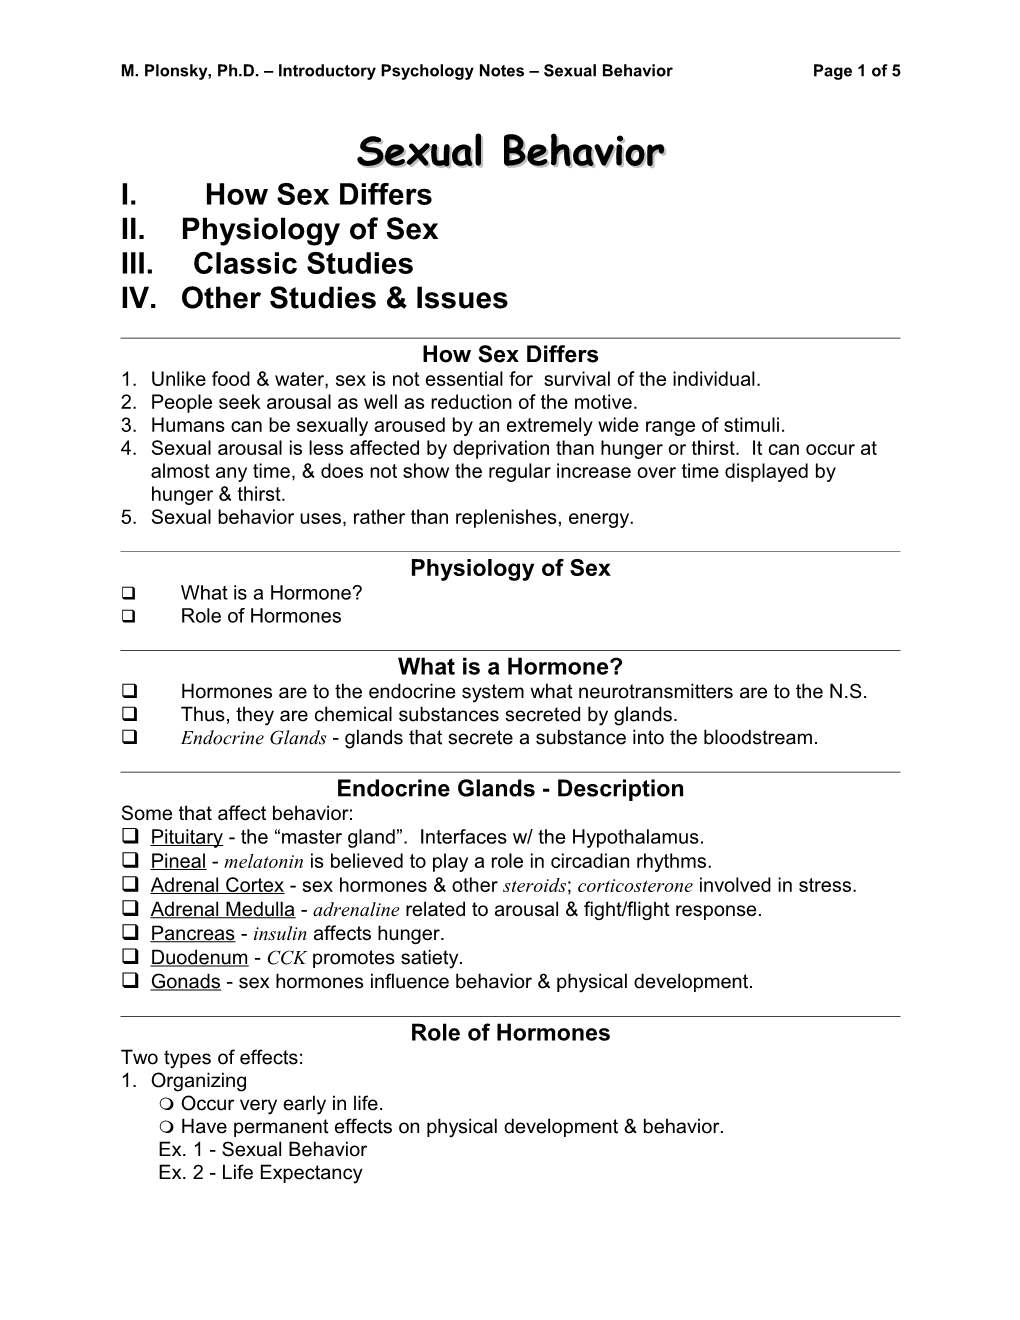 M. Plonsky, Ph.D. Introductory Psychology Notes Sexual Behavior Page 5 of 5